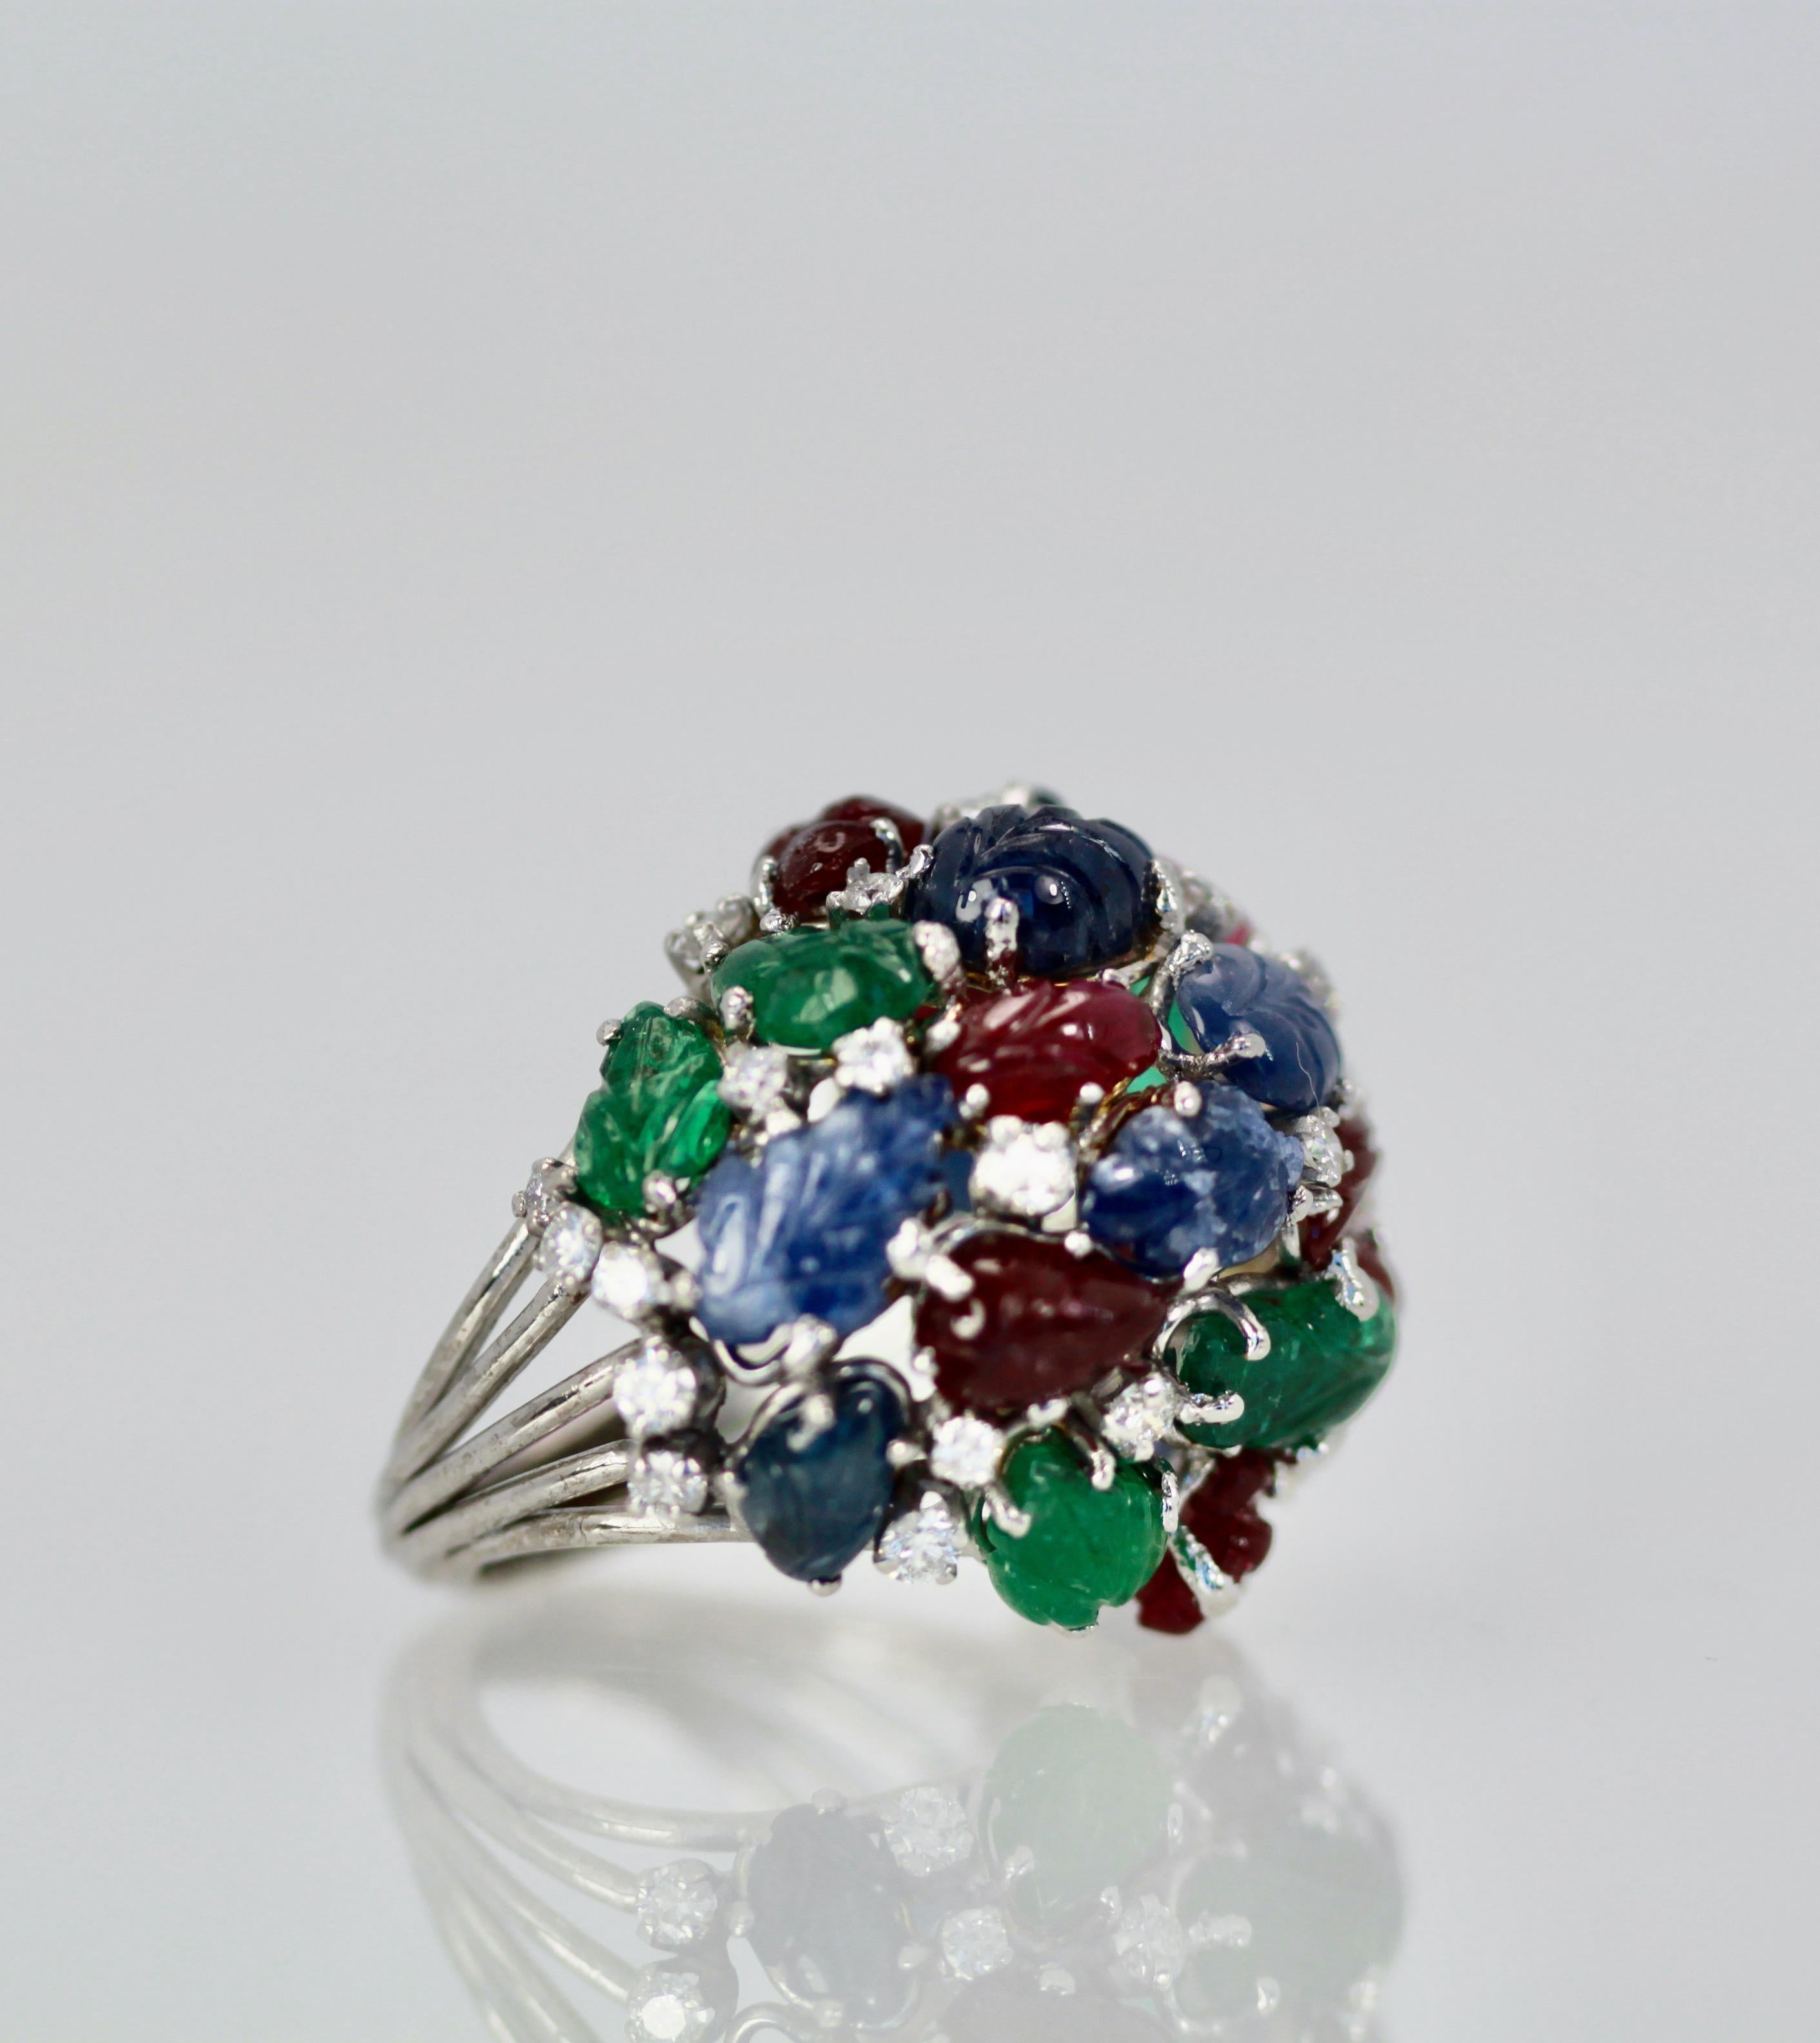 This huge Tutti Frutti Ring is special due to its size and the gorgeous carved gemstone leaves.  There are Rubies, Emeralds, Sapphires with Diamonds interspersed throughout.  Tutti frutti jewelry is rare and special as most of it was made in the